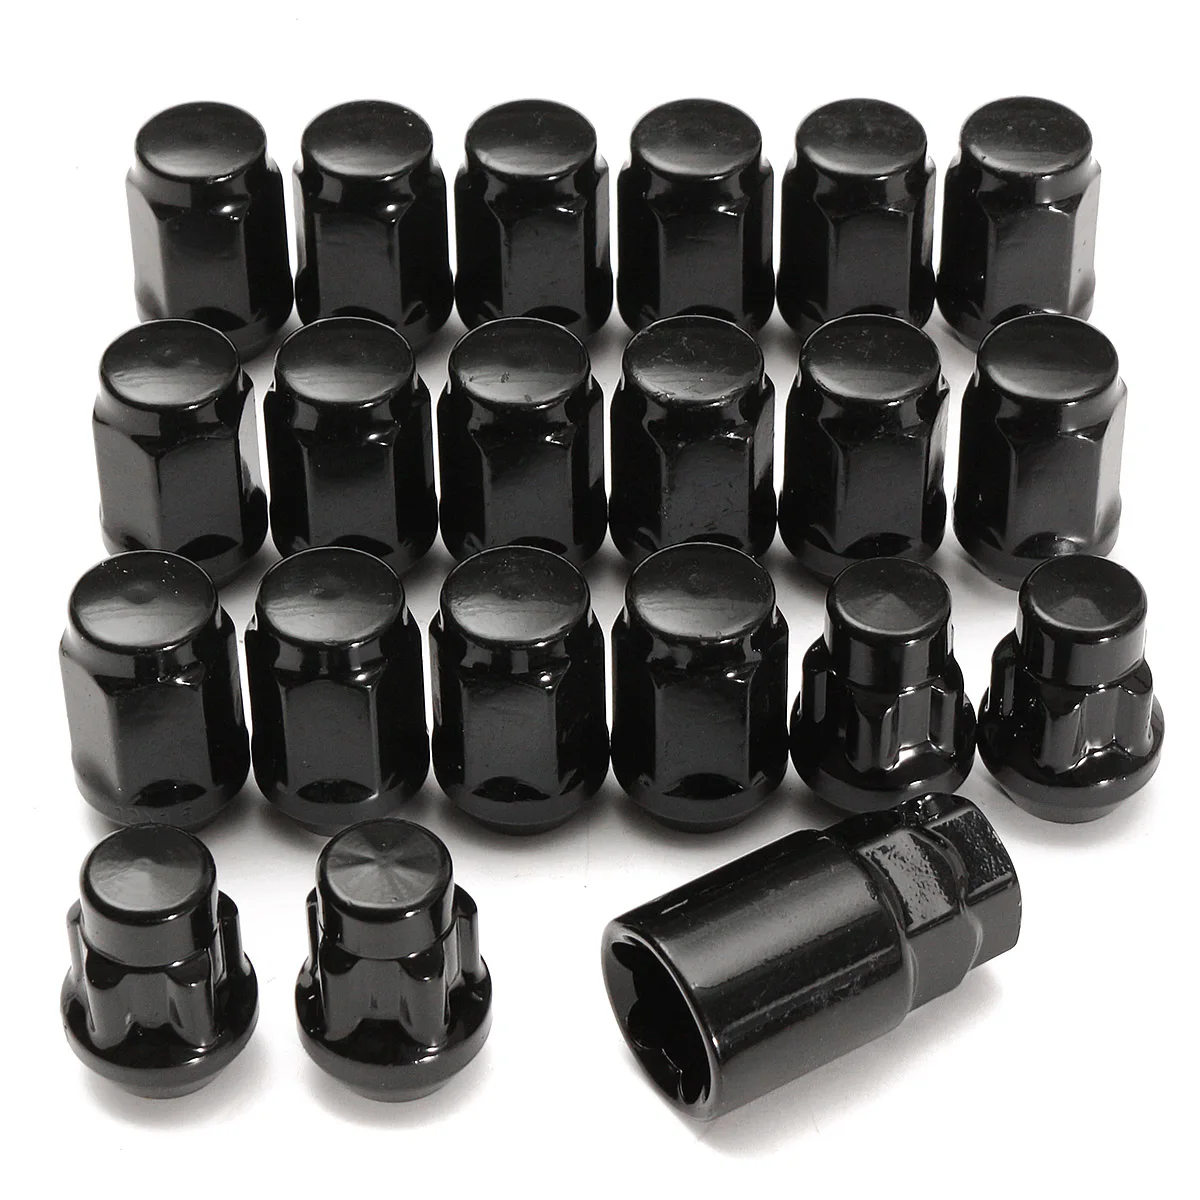 

21Pcs/Set M12x1.5mm Black Alloy Car Wheel Locking Nuts Blots Locker With Key For Ford for Focus for C-Max 2007 2008 2009 2010